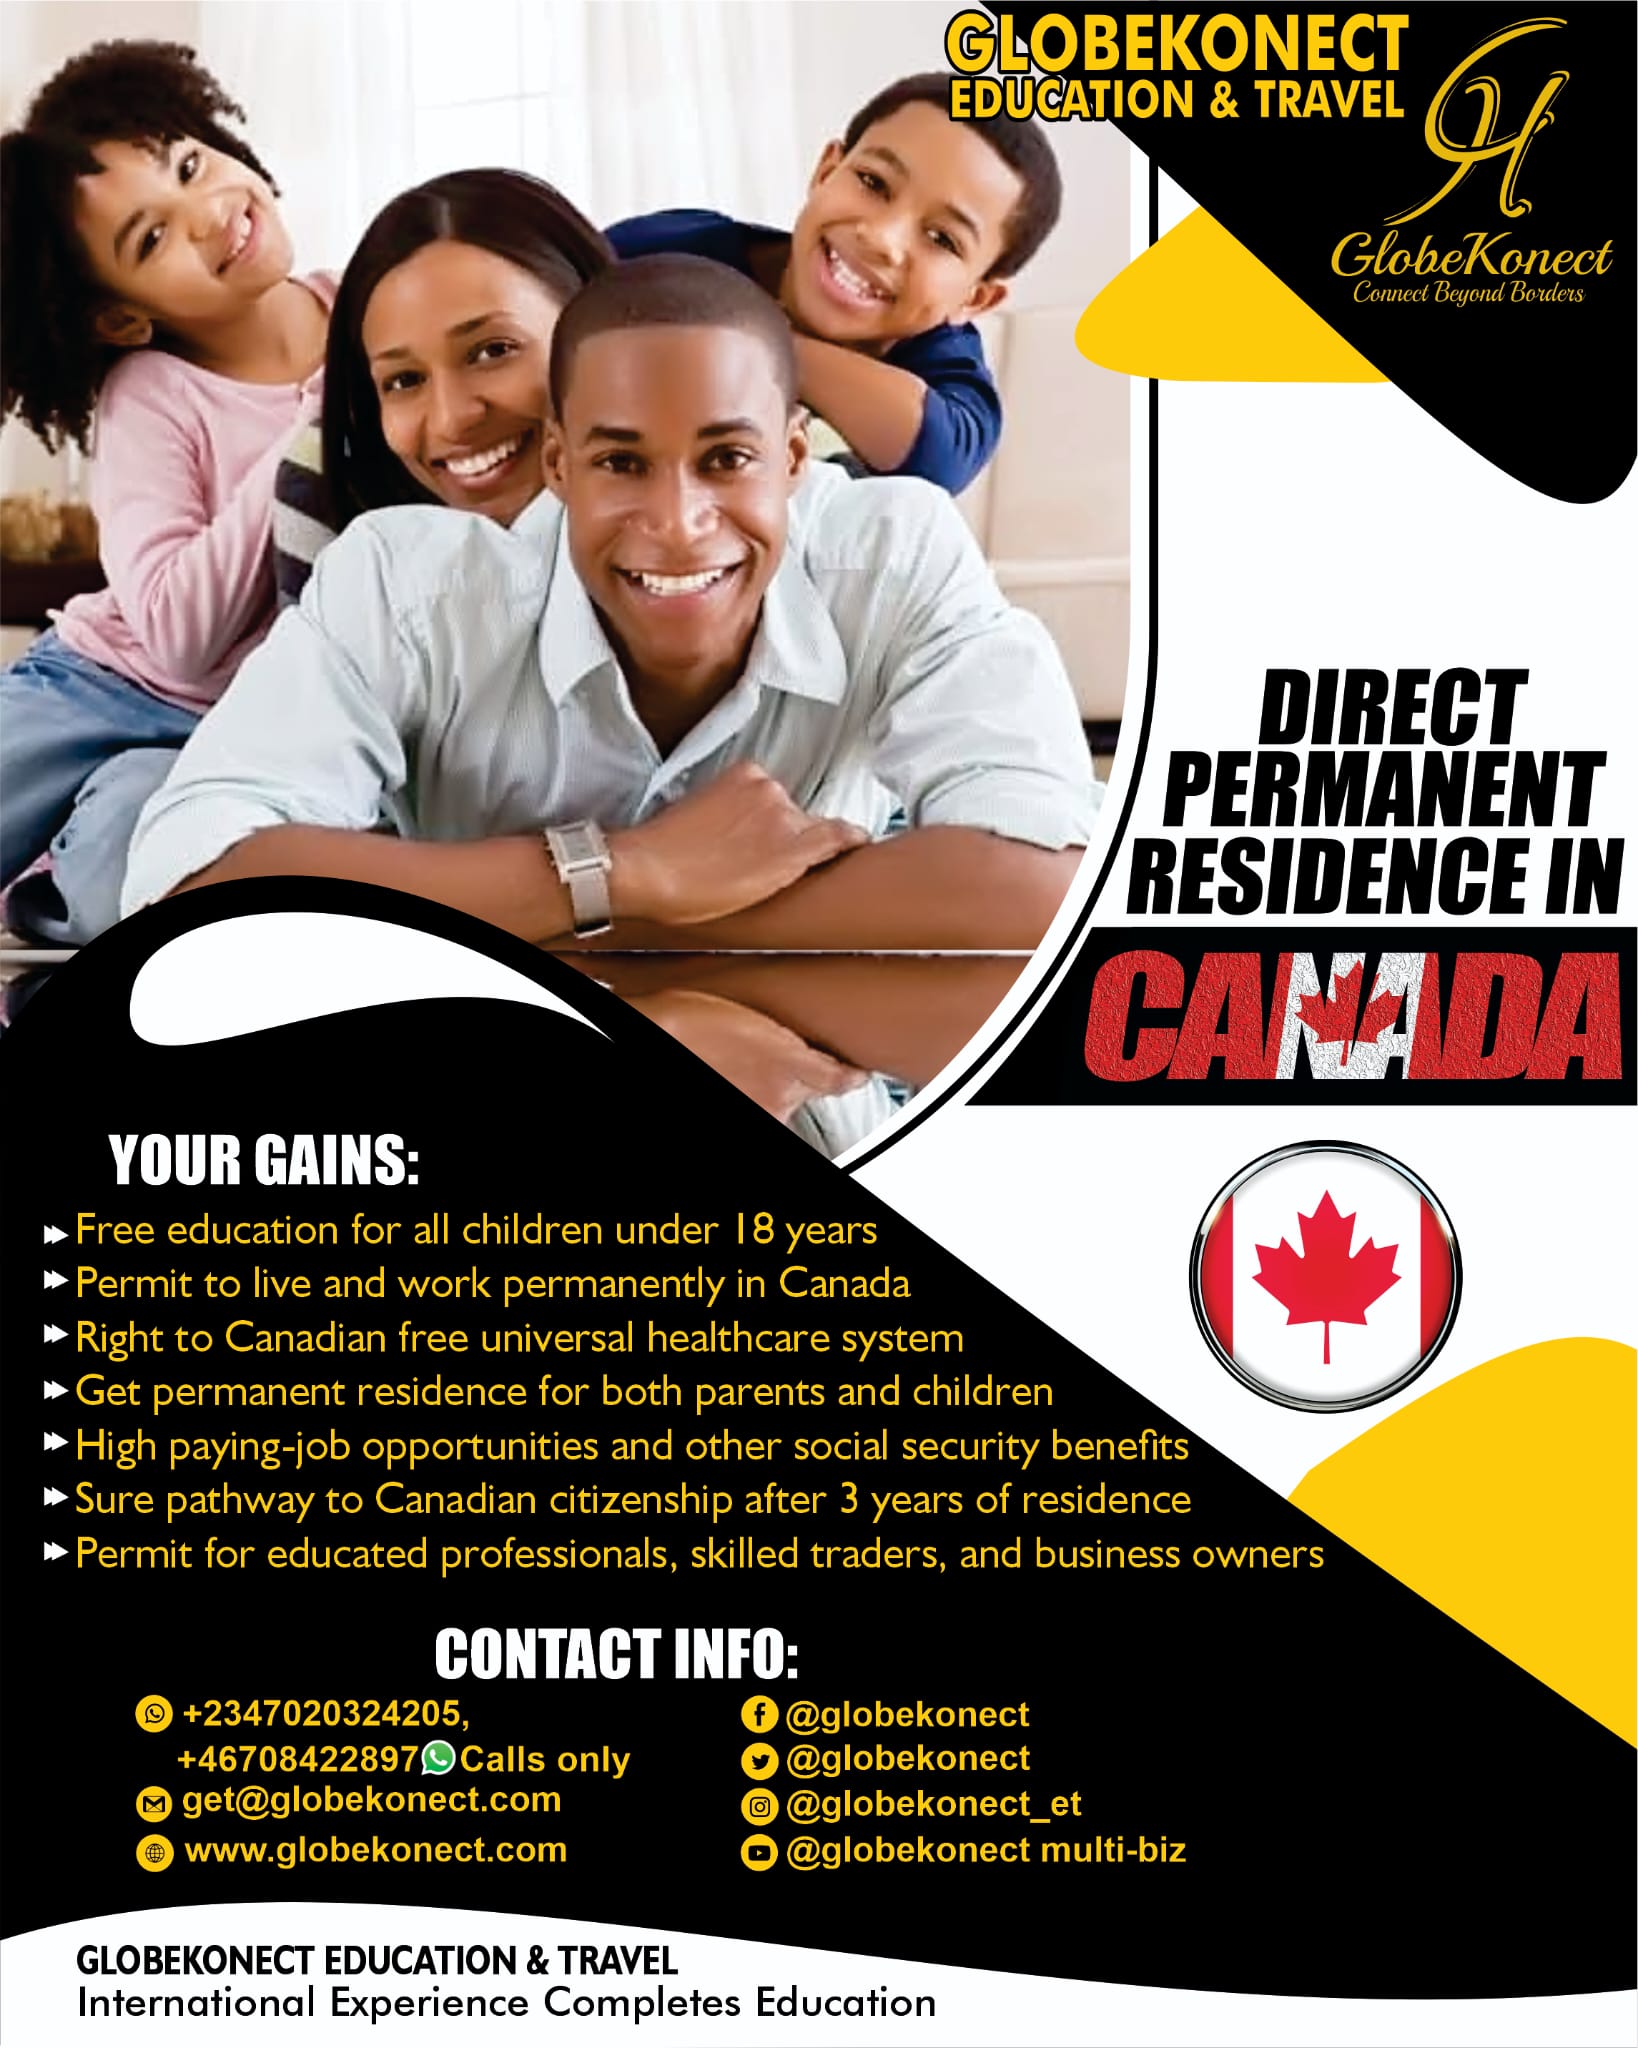 Direct Permanent Residence in Canada